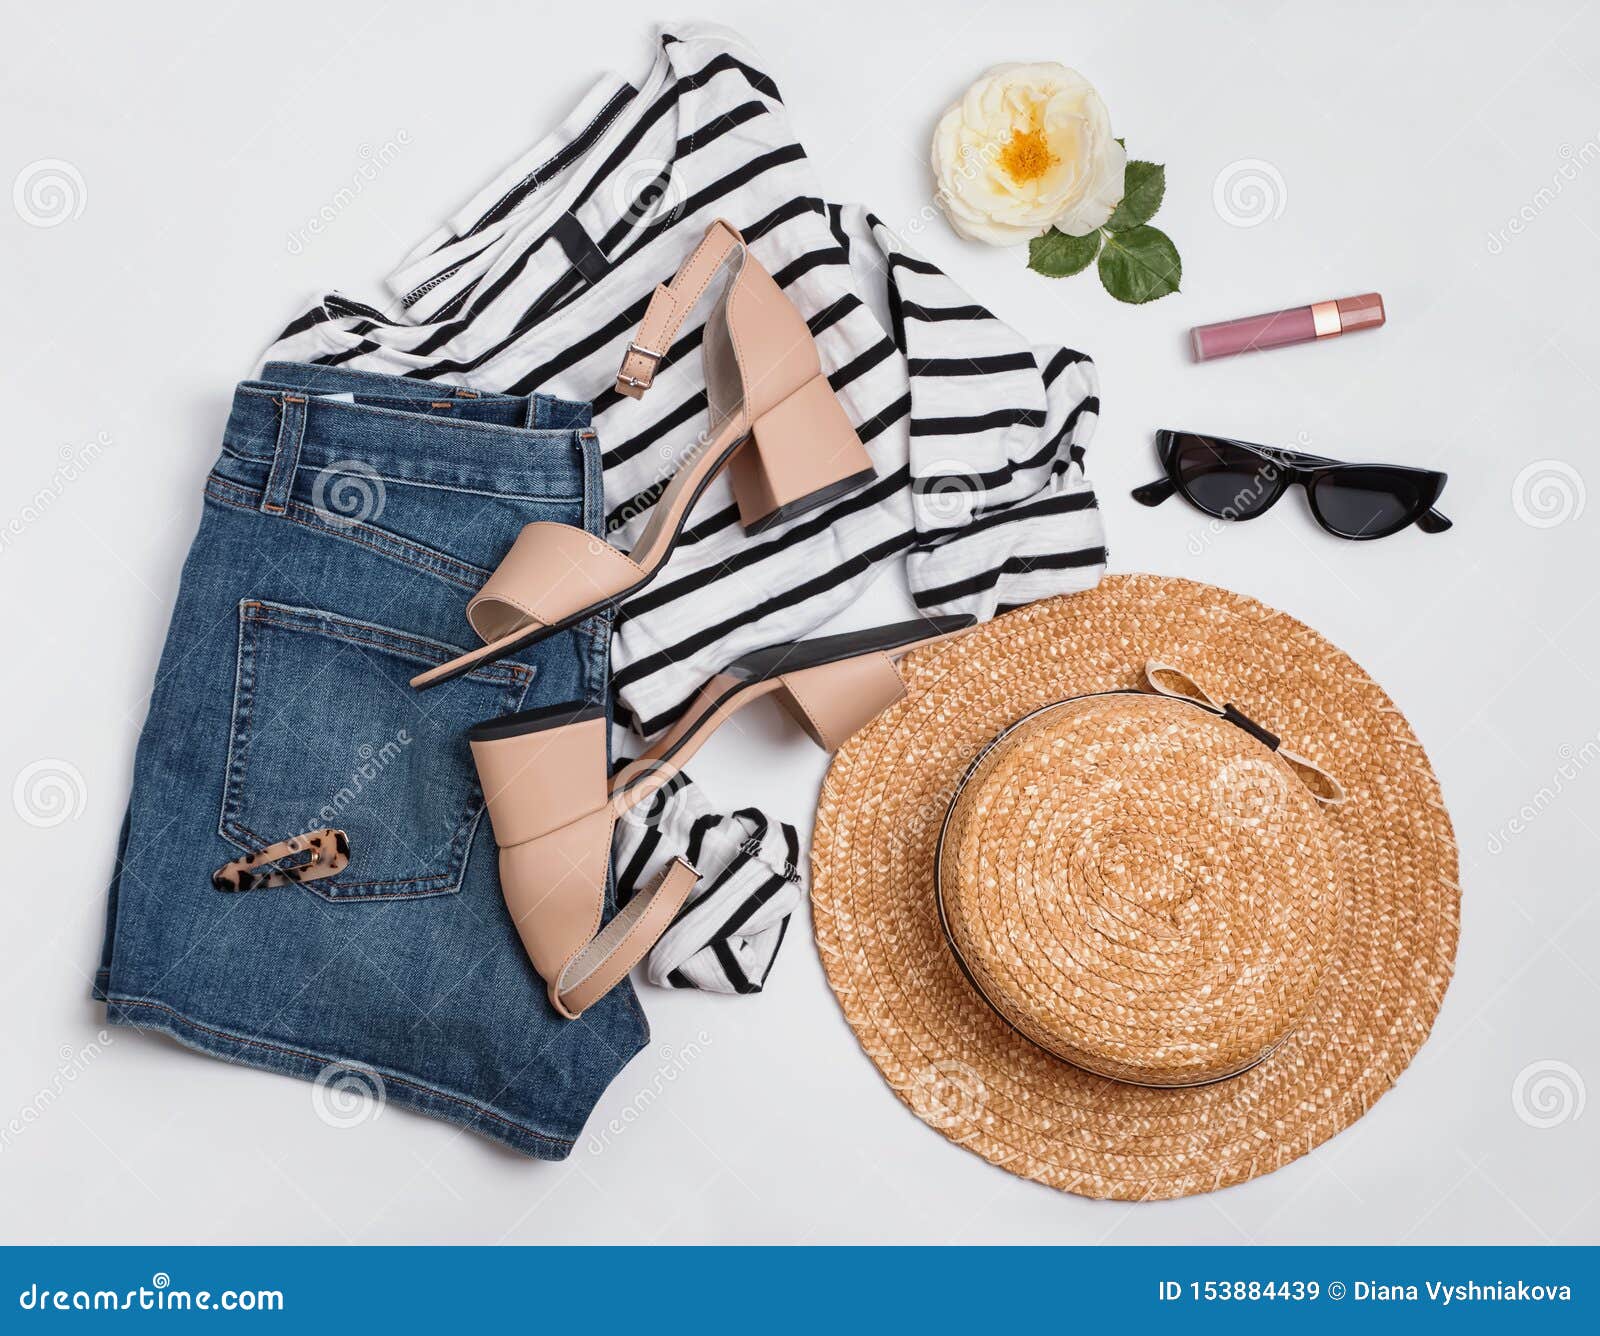 acquaintance Forward Make a snowman Woman`s Summer Outfit with Striped Shirt, Jeans Shorts, Beige Sandals and  Other Stock Image - Image of composition, clothes: 153884439